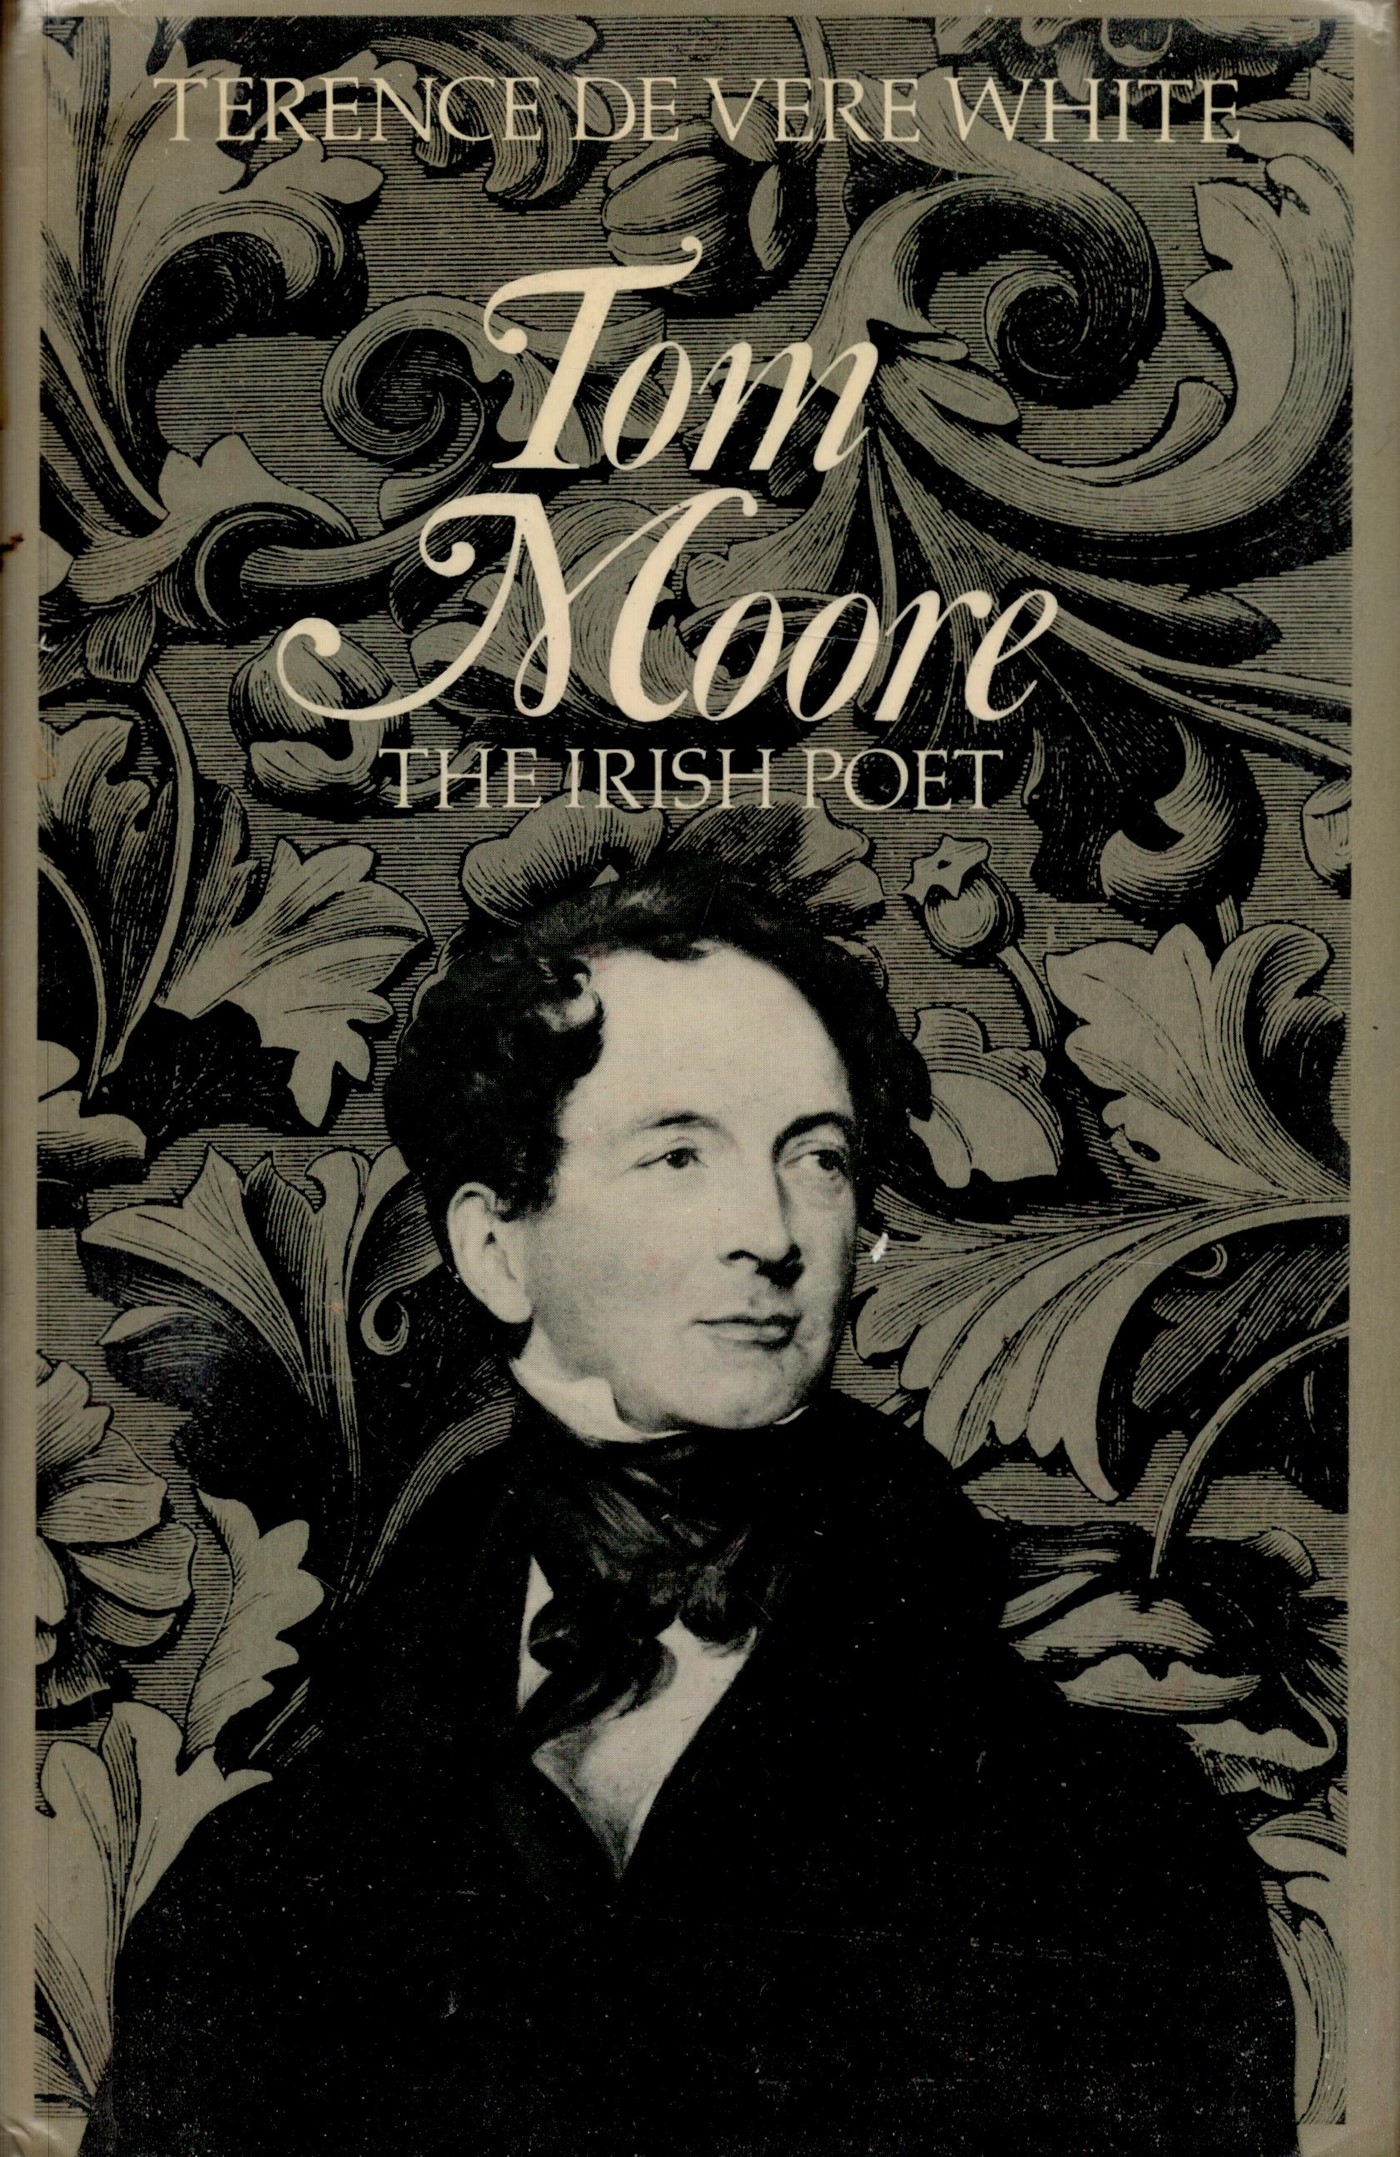 Tom Moore The Irish Poet by Terence De Vere White Hardback Book 1977 First Edition published by